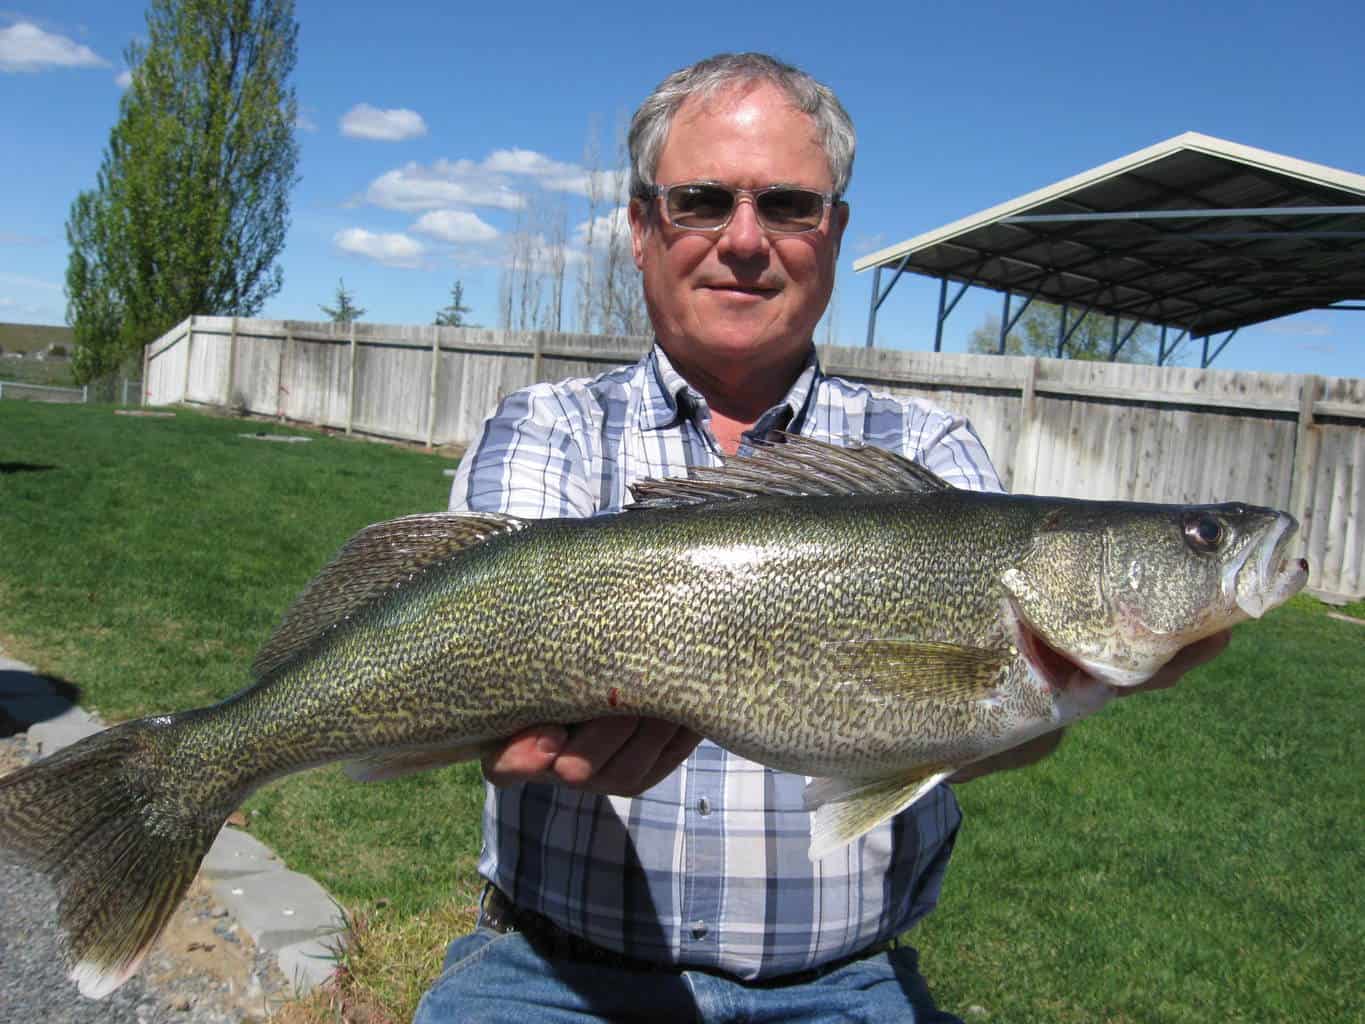 Angler holds a large walleye caught in Potholes Reservoir.